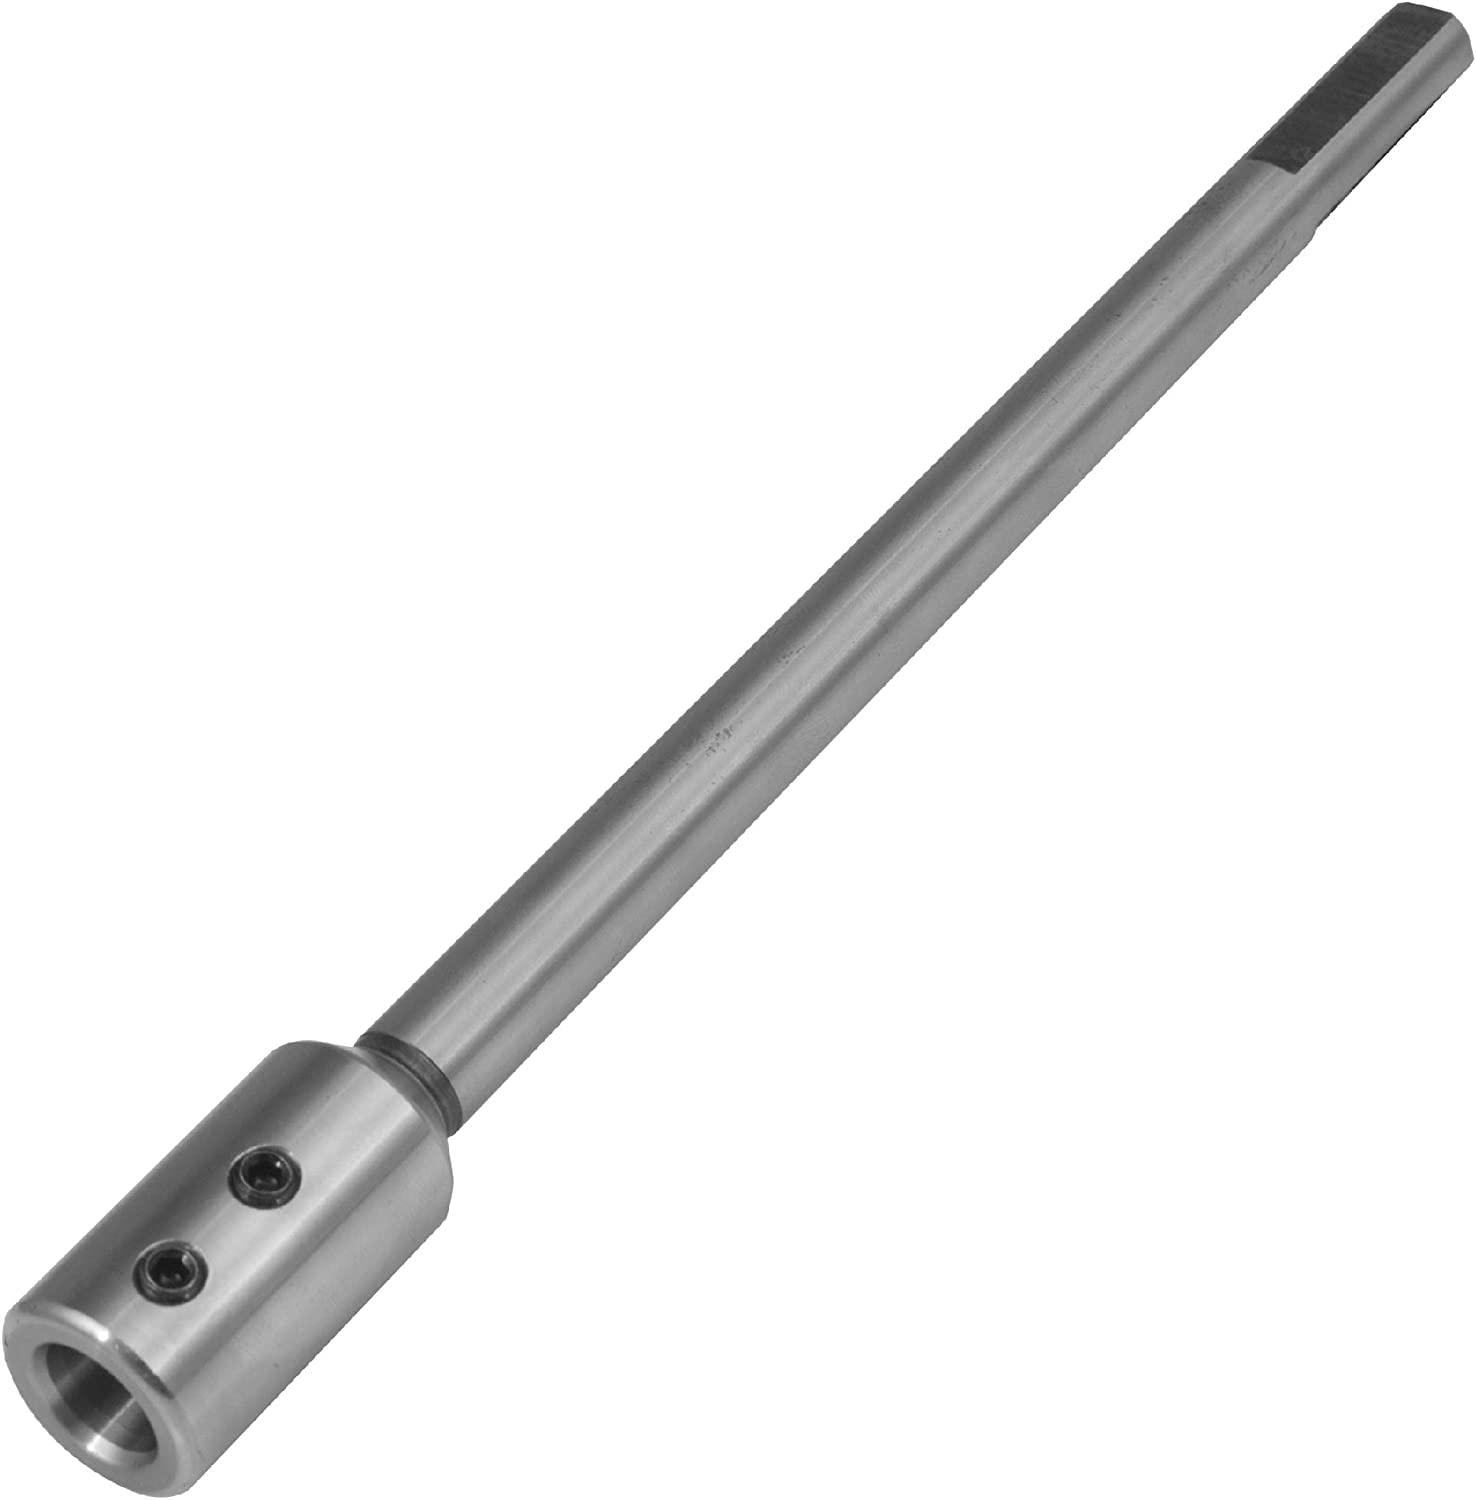 Fulton, Fulton 10 inch Long Forstner Bit Extension For Adding Over 8 of Drilling Depth To Your Forstner Bit Ideal For Wood Turners Furniture Carpentry and Construction (1/2 inch collet)